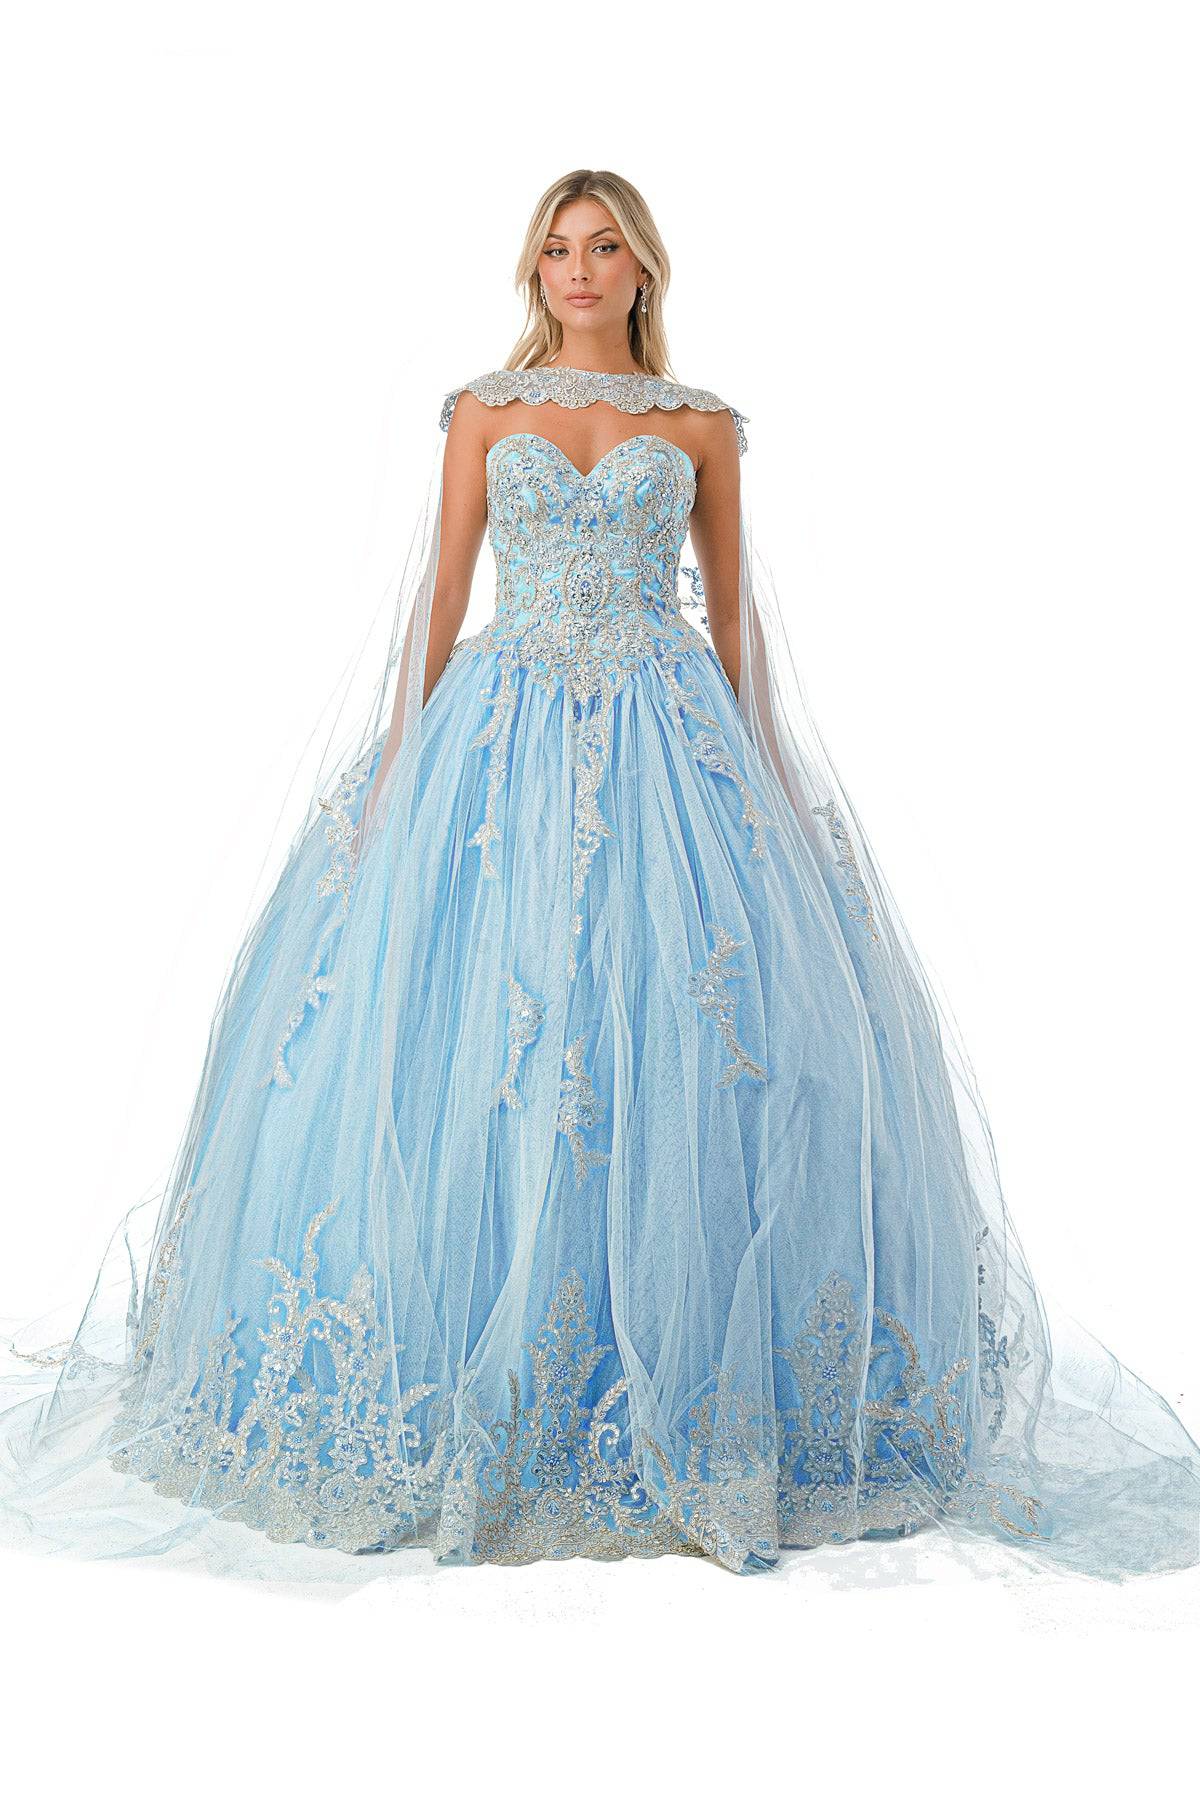 Aspeed L2726 Crystal Stone Embroidered Quinceanera Dress - NORMA REED